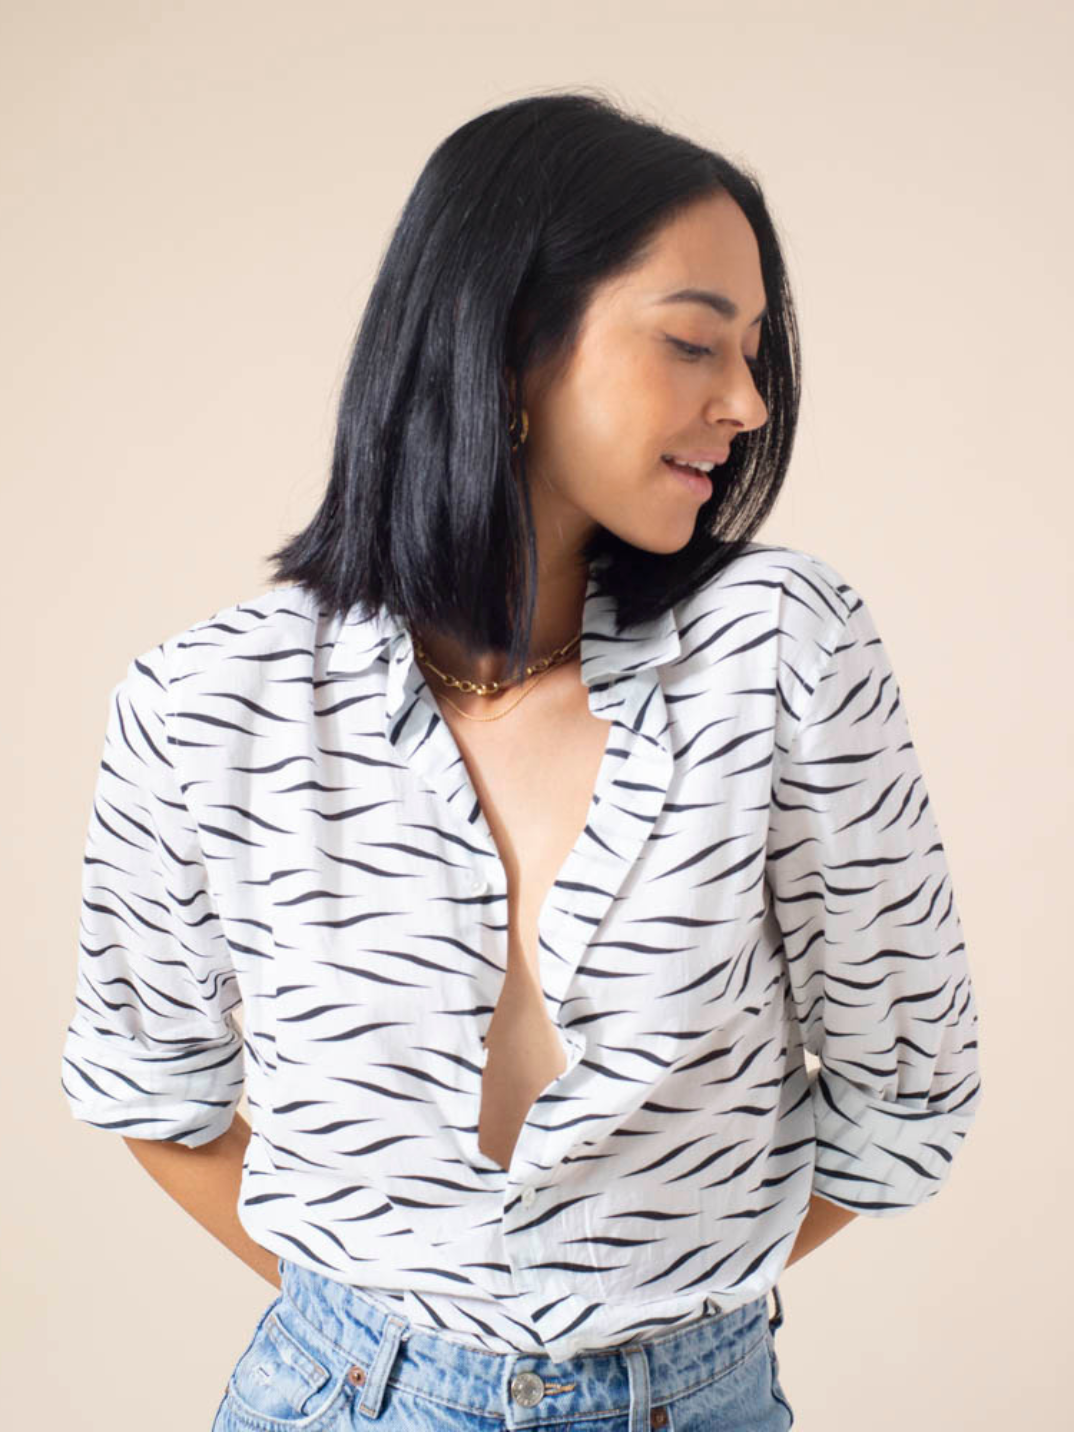 Every capsule wardrobe needs a classic shirt – and you’ve found it with The Avery Button Down. Made from 100% organic cotton, The Avery combines comfort with a polished finish. Tie with a front knot for a more relaxed weekend vibe, or tuck in for an instantly elevated work look. shop sustainable fashion women's clothing